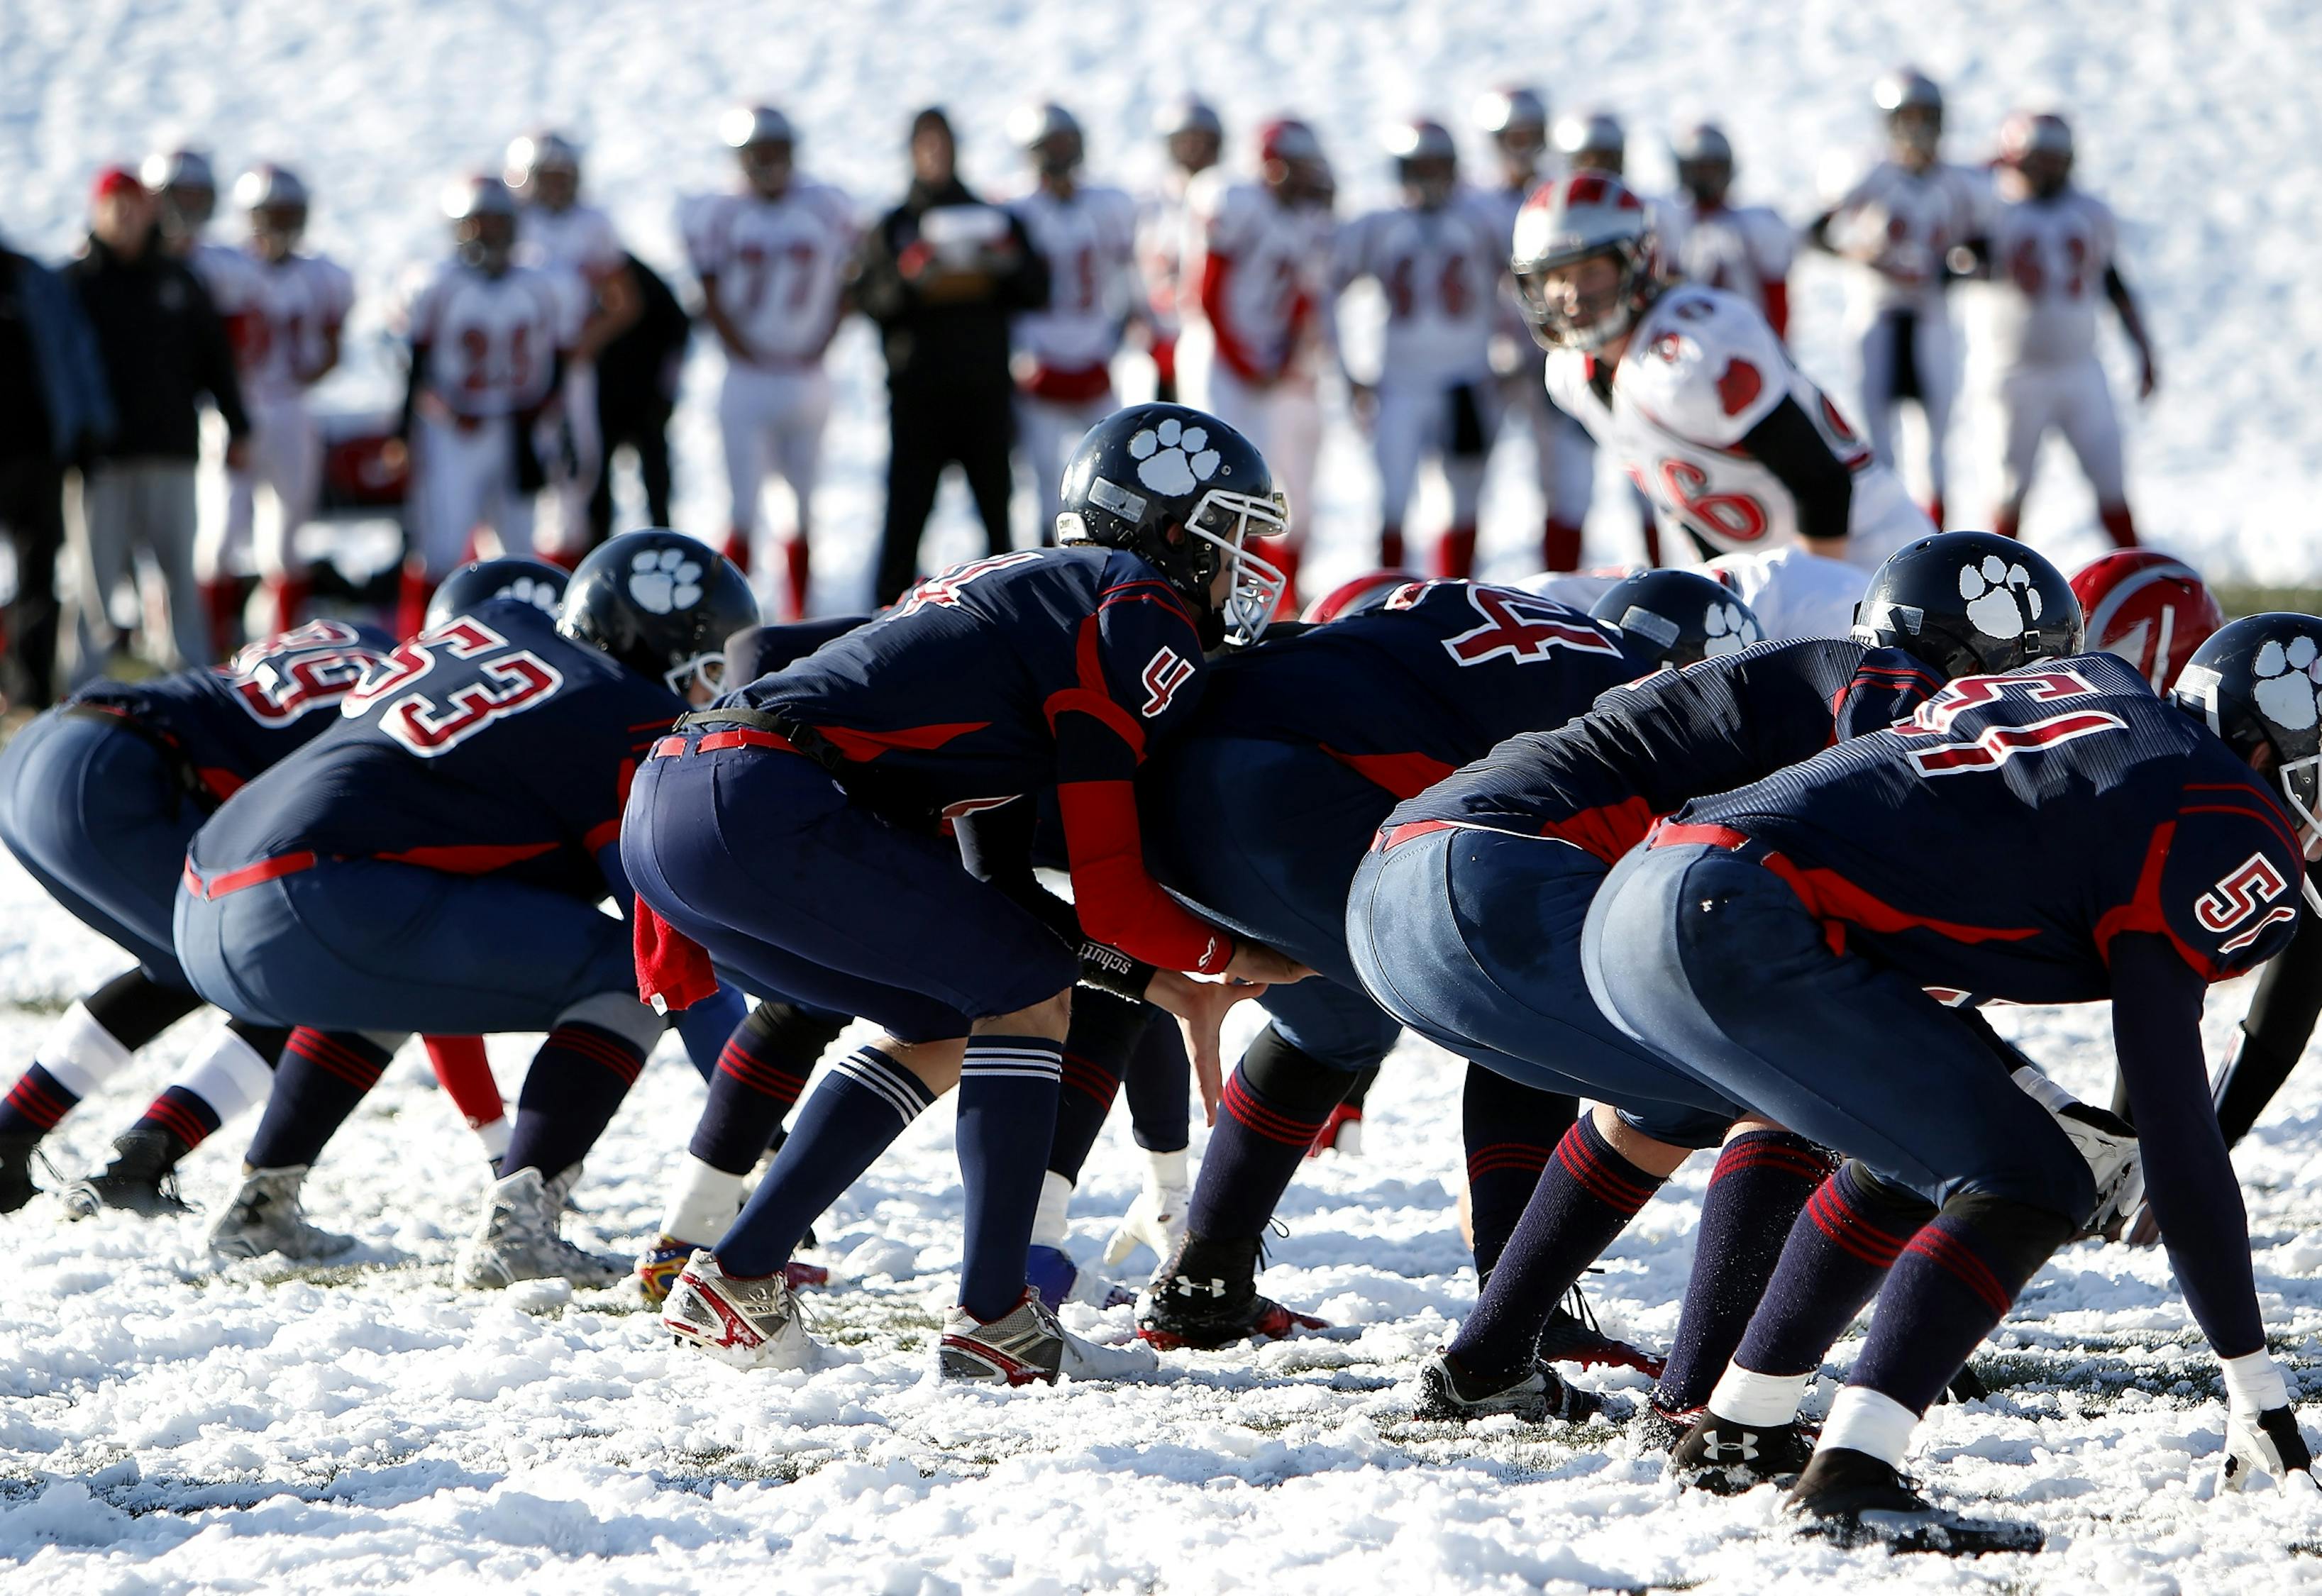 Football Team on Ice during Daytime · Free Stock Photo